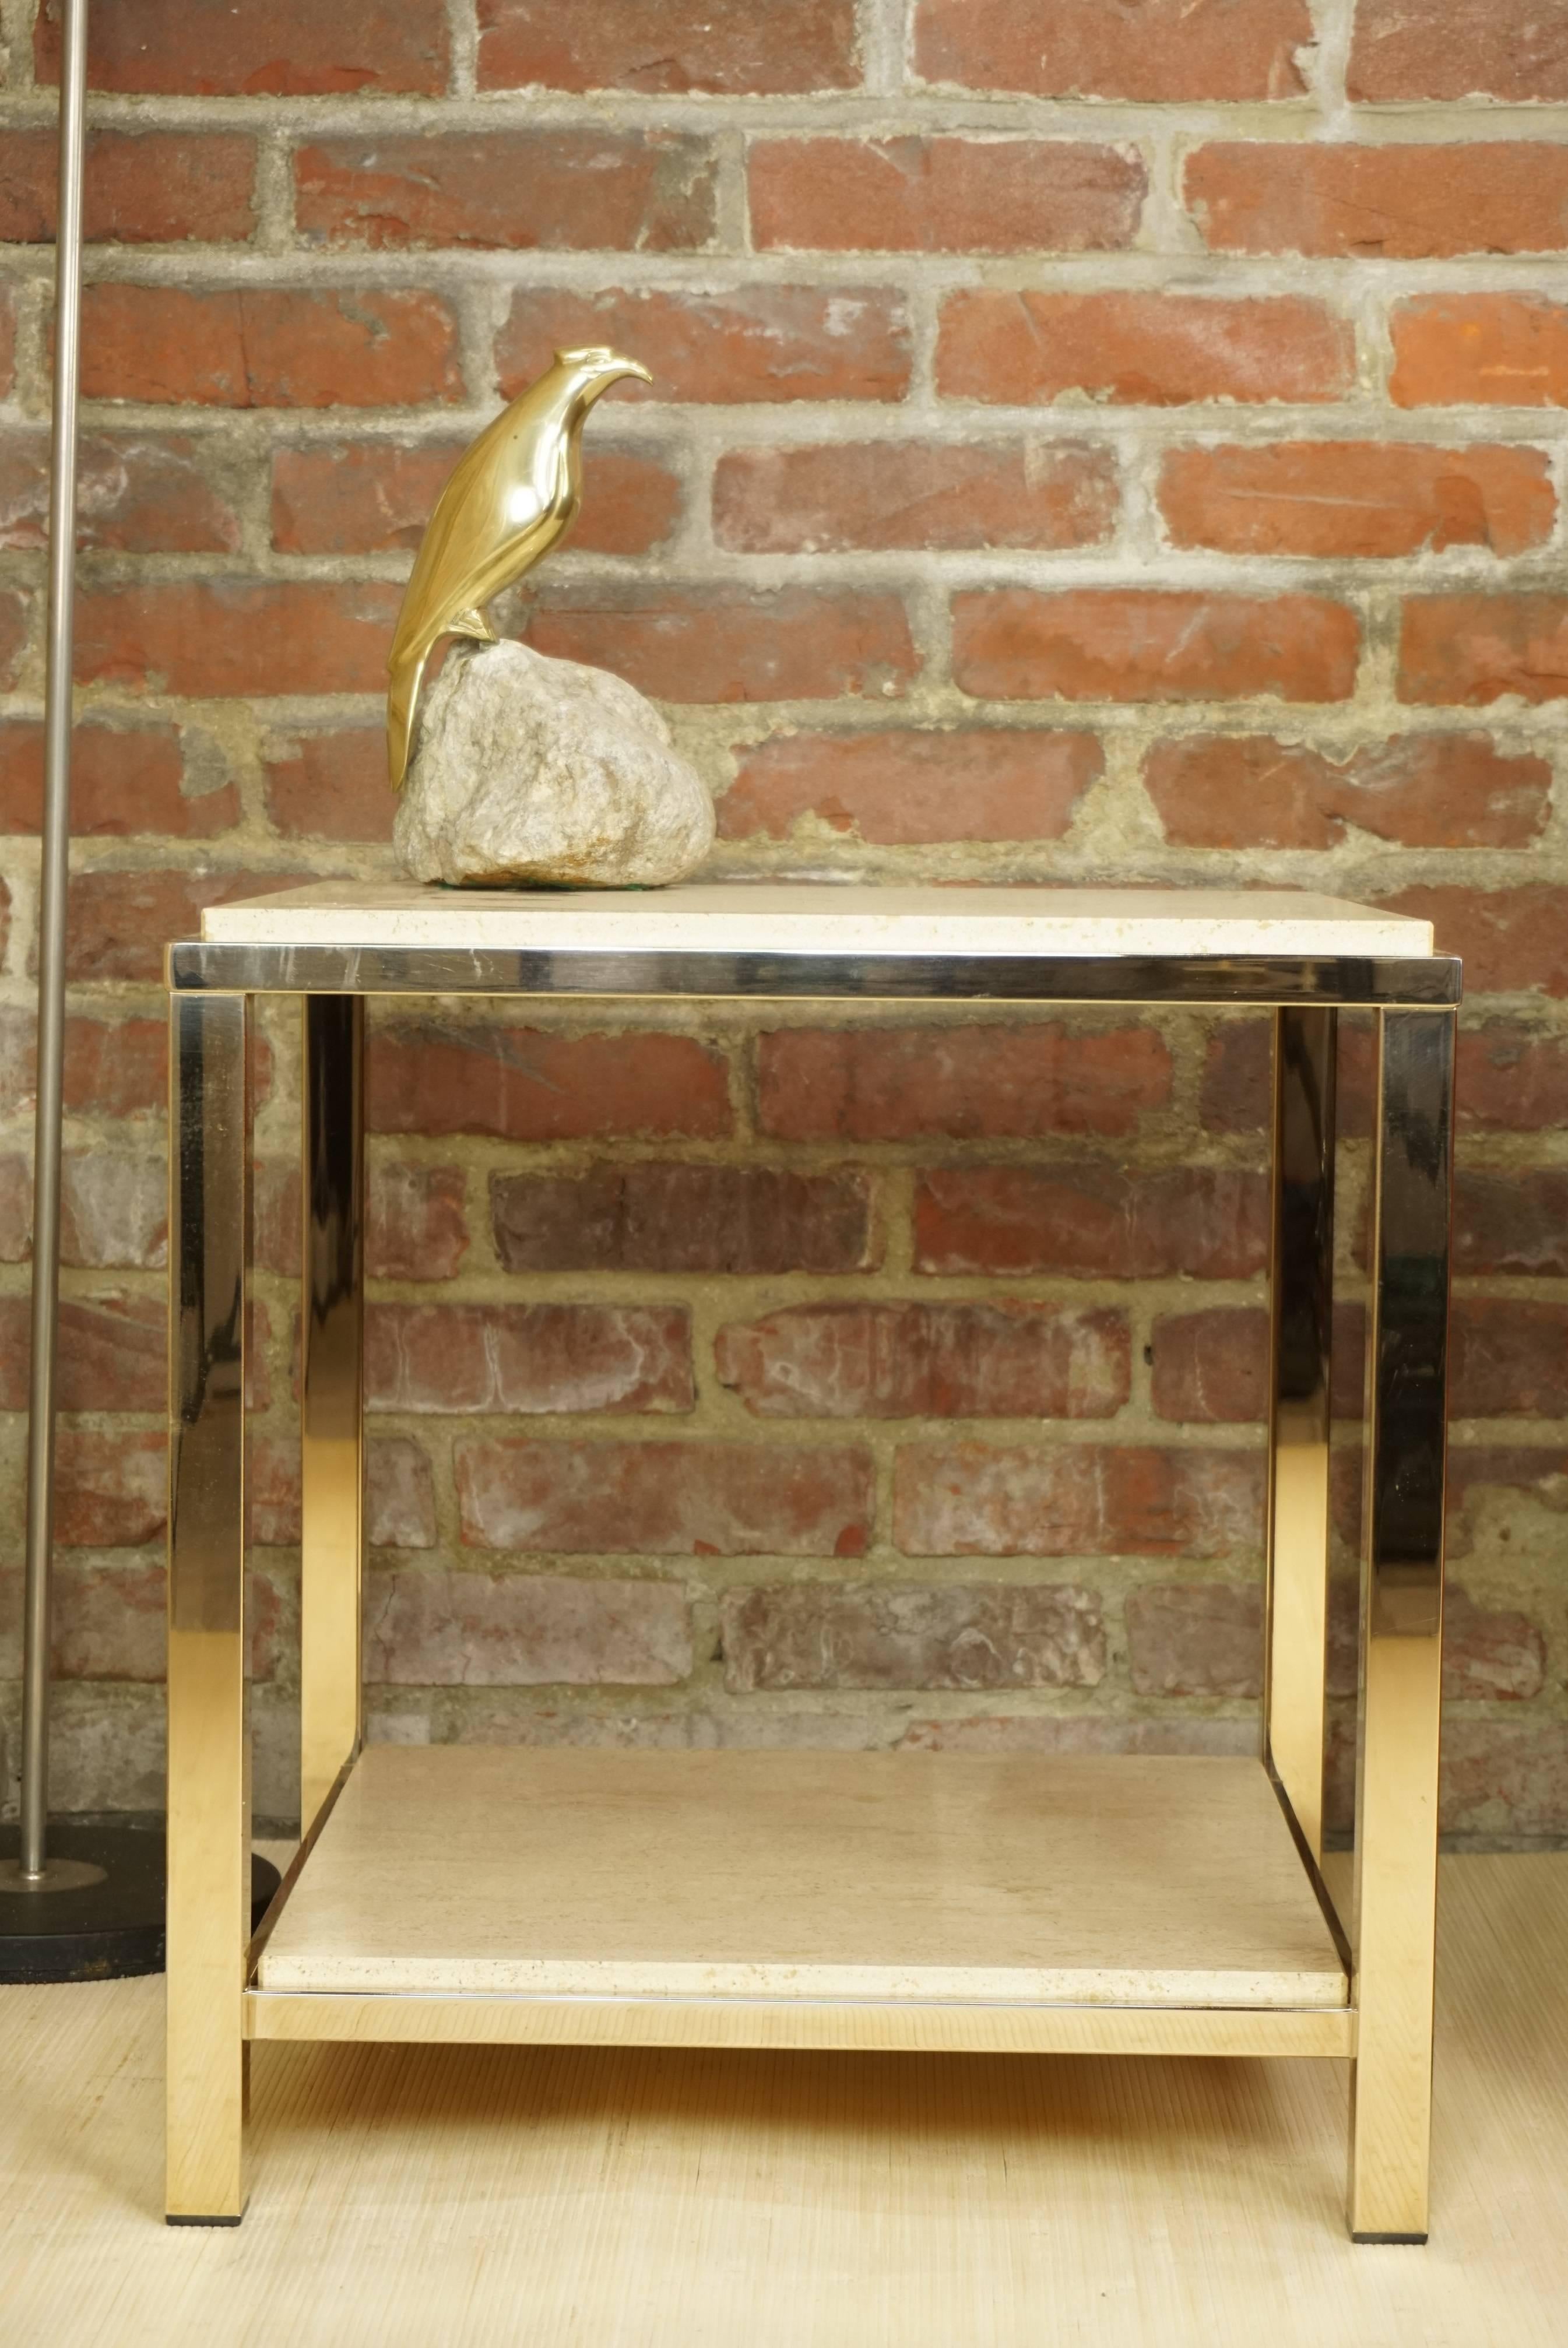 Pair of Gold-Plated Side Table with Travertine Shelf, 23-Carat by Belgo Chrome For Sale 1